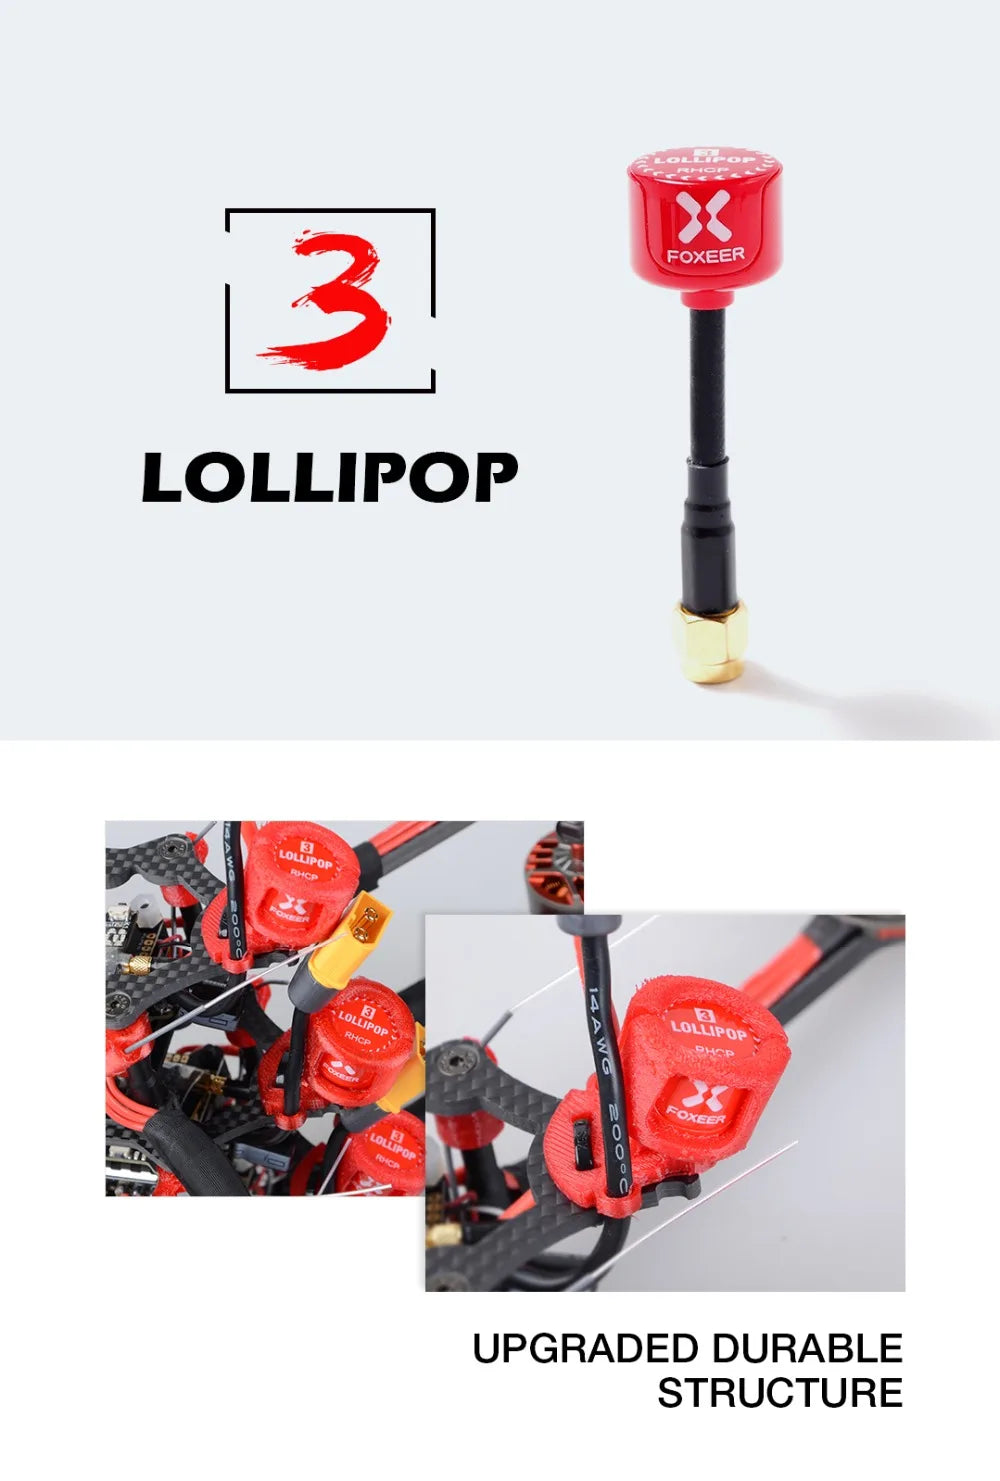 Upgraded Version Foxeer Antenna, LOLLIPOP 0 UPGRADED DURABLE STRUCTURE Lol